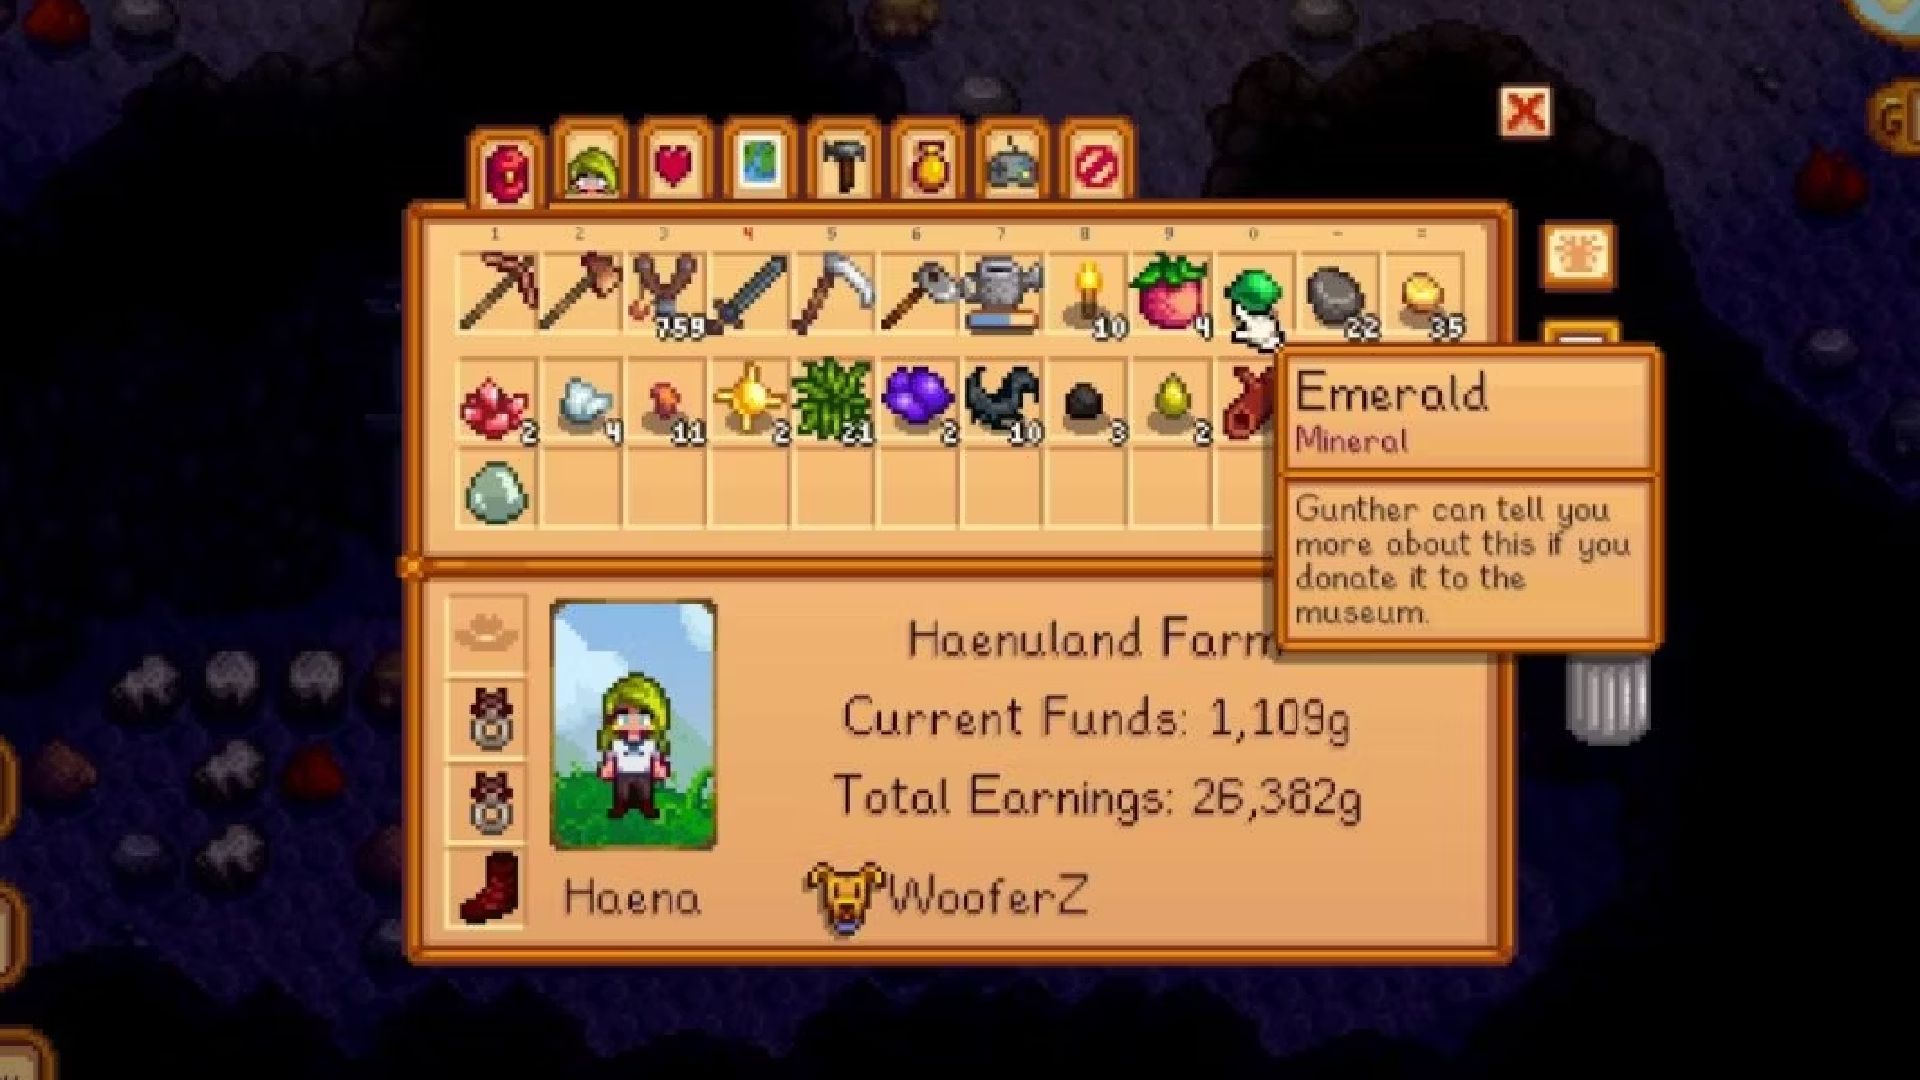 stardew valley player inventory with emerald selected